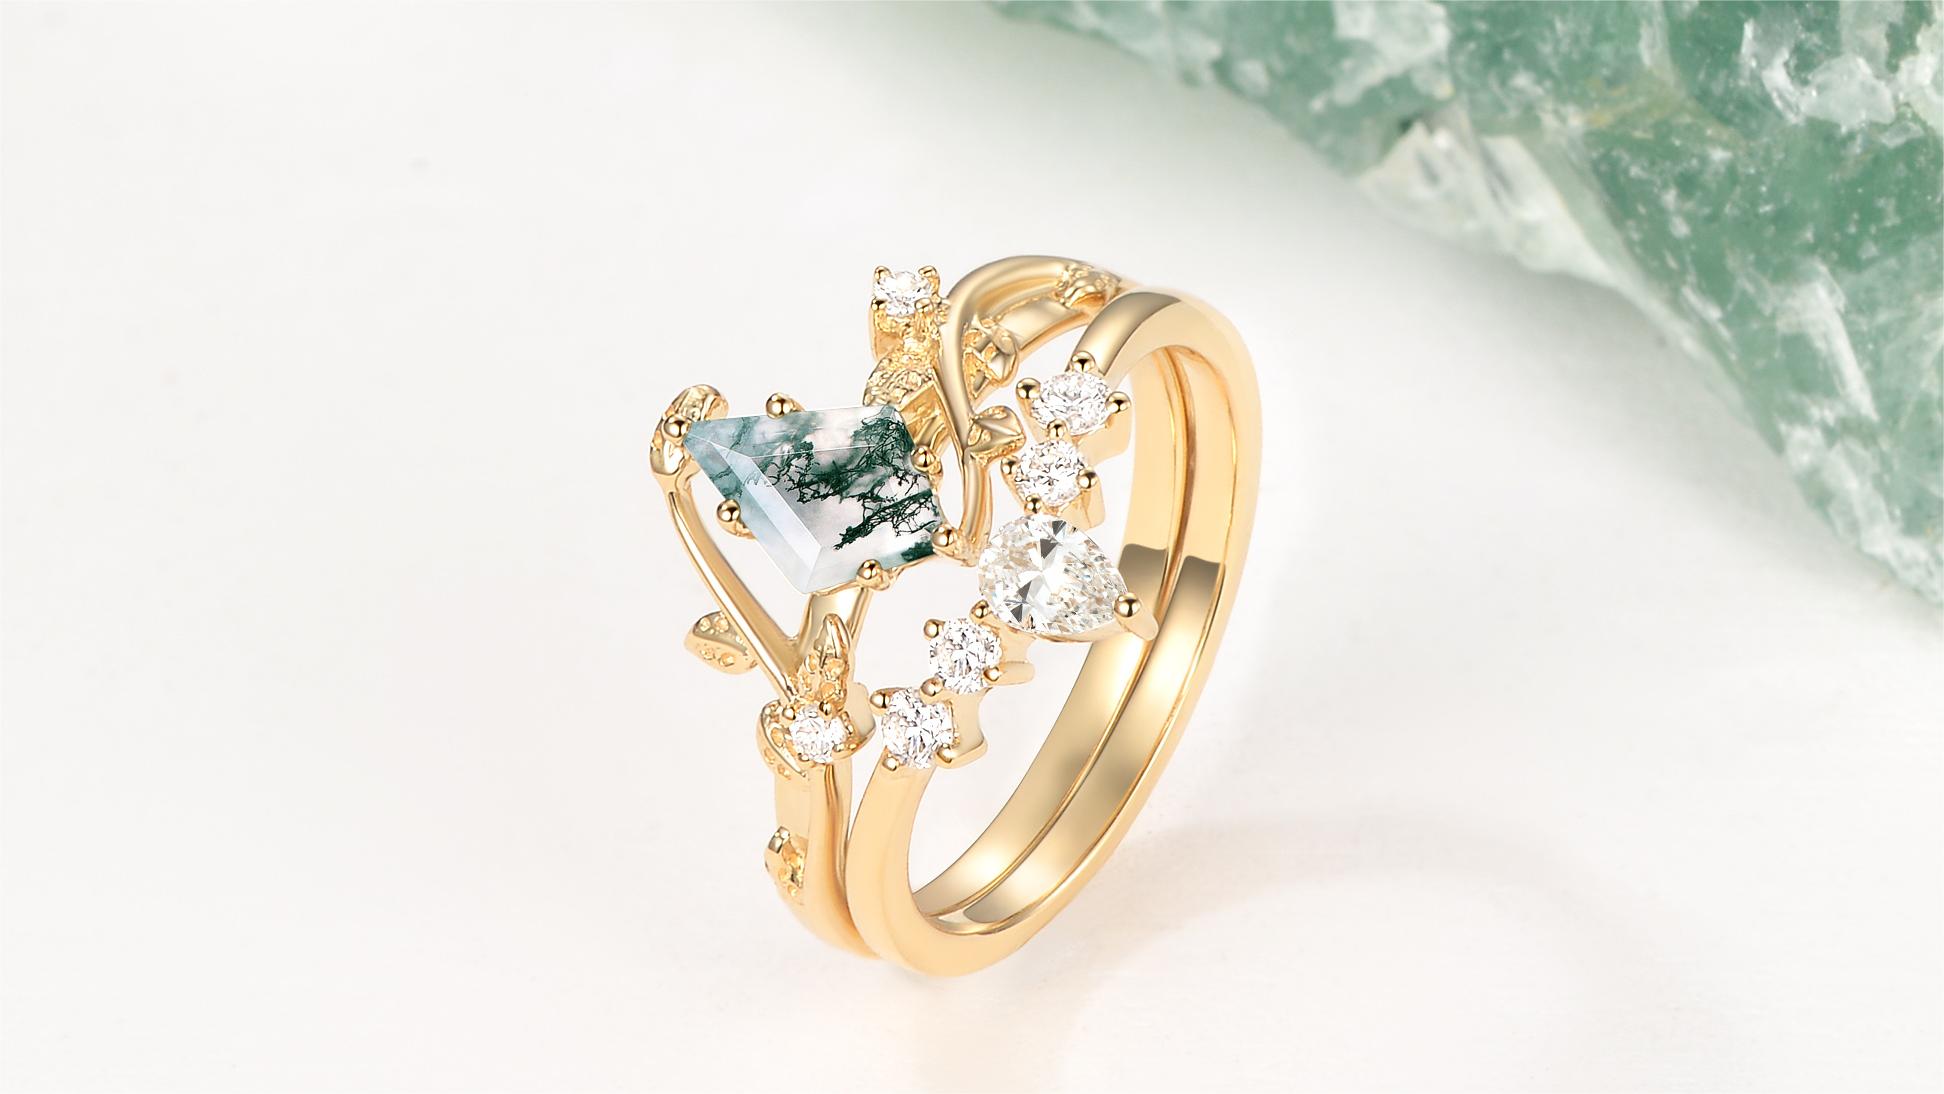 What Gemstones Are Popular for Engagement Rings Besides Diamonds?